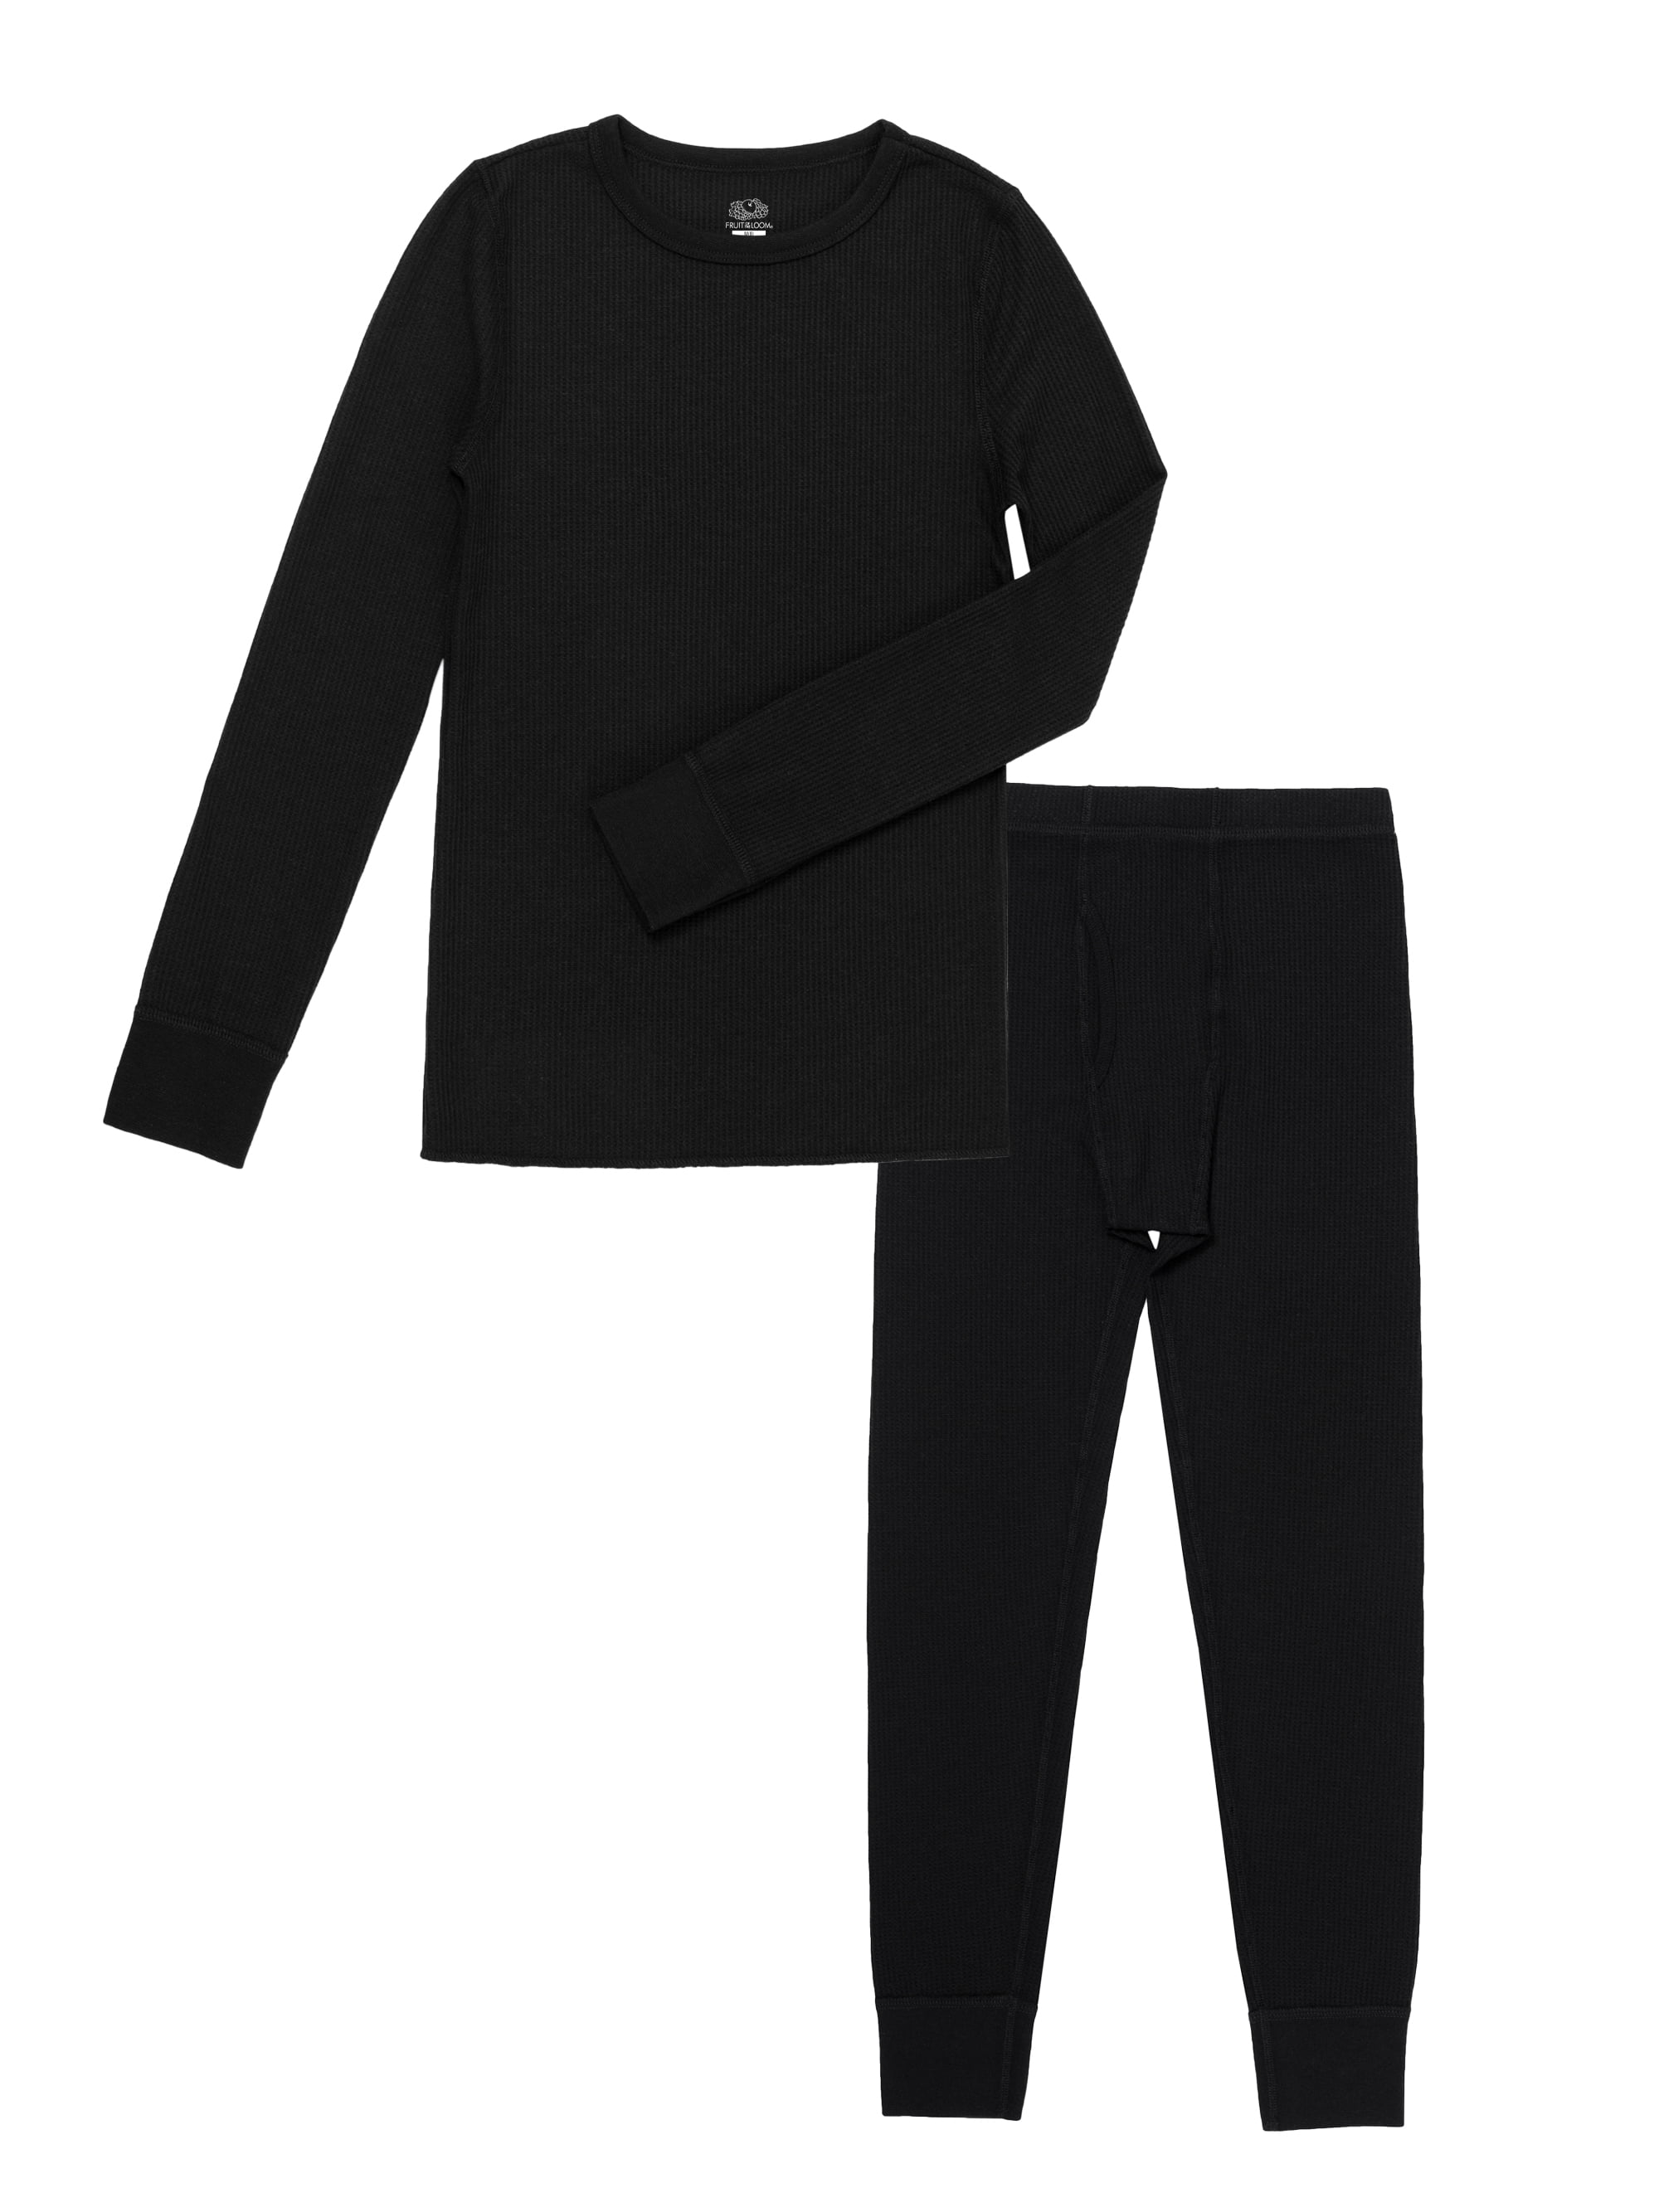 LAVRA Girl's Cotton Thermal Sets, Fleece Lined Insulated Long John Pajama  & Underwear for Girls